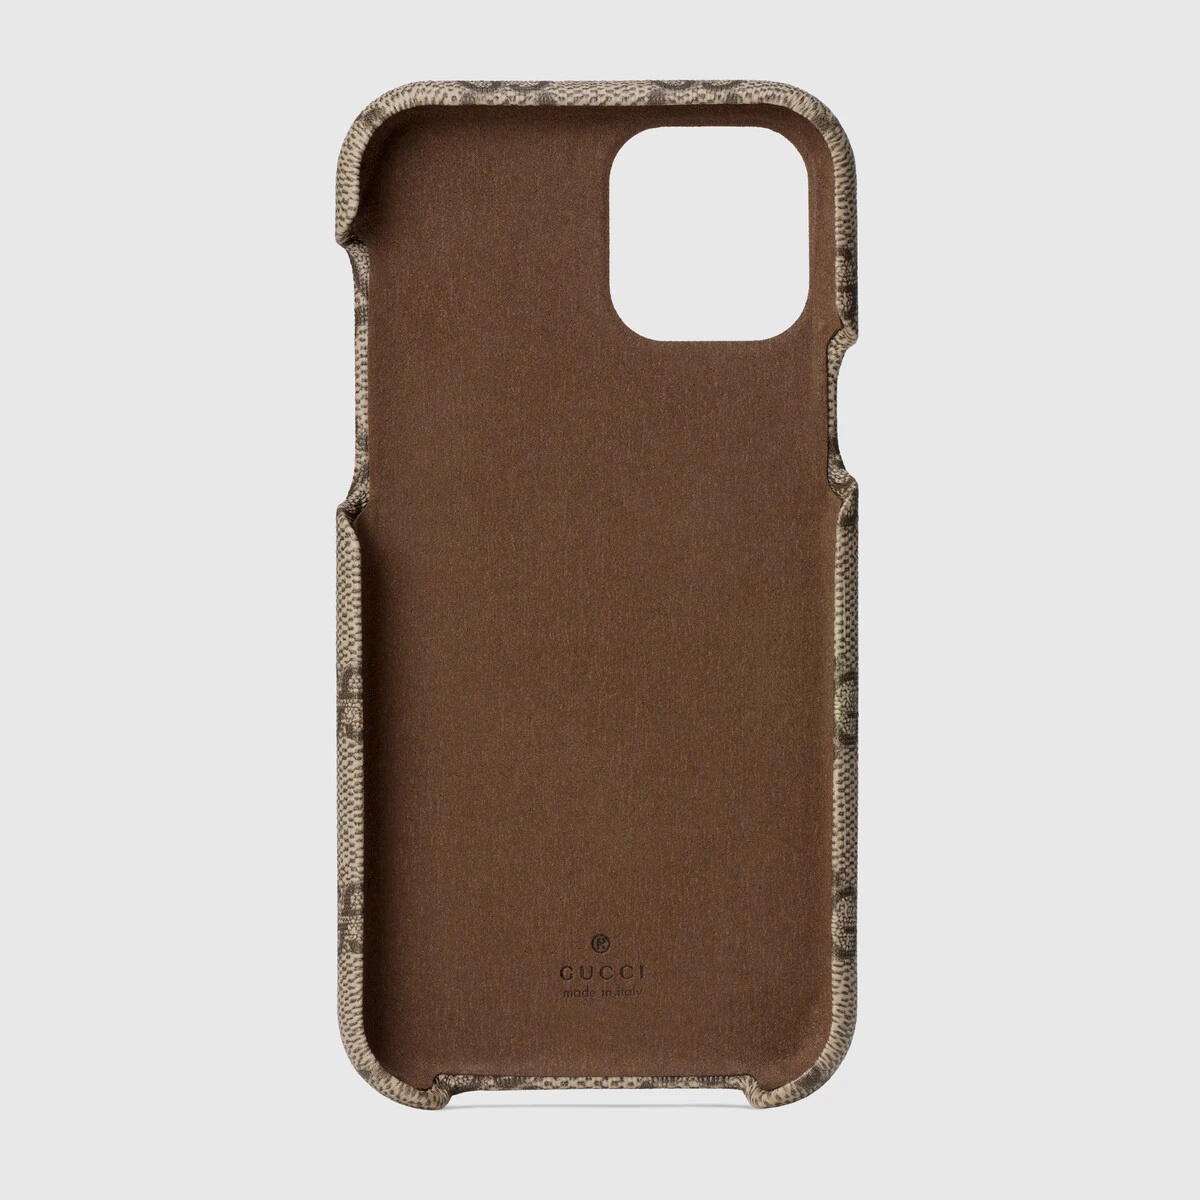 GG Marmont case for iPhone 12 and iPhone 12 Pro - 2